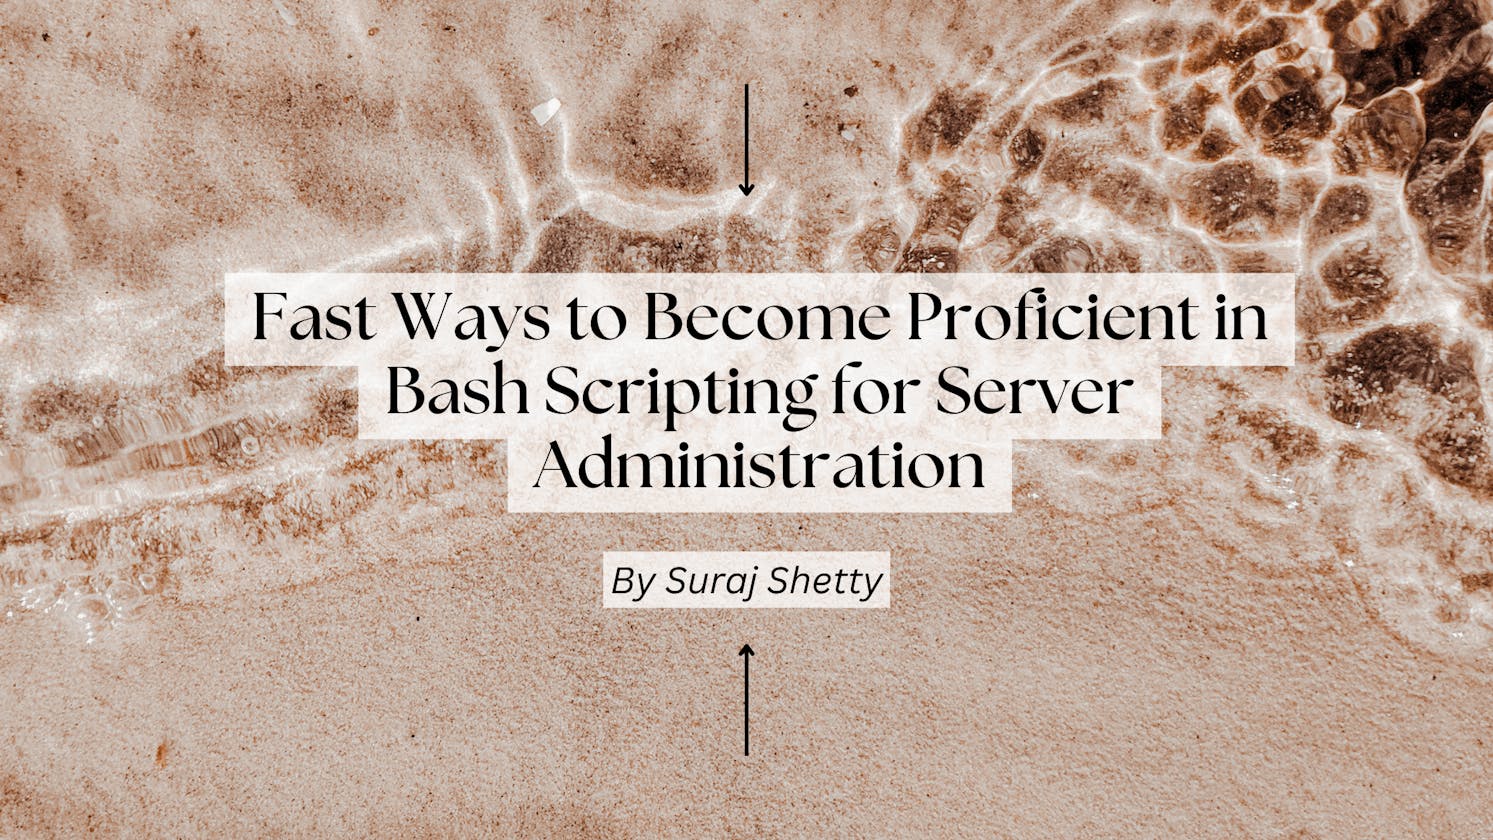 Fast Ways to Become Proficient in Bash Scripting for Server Administration